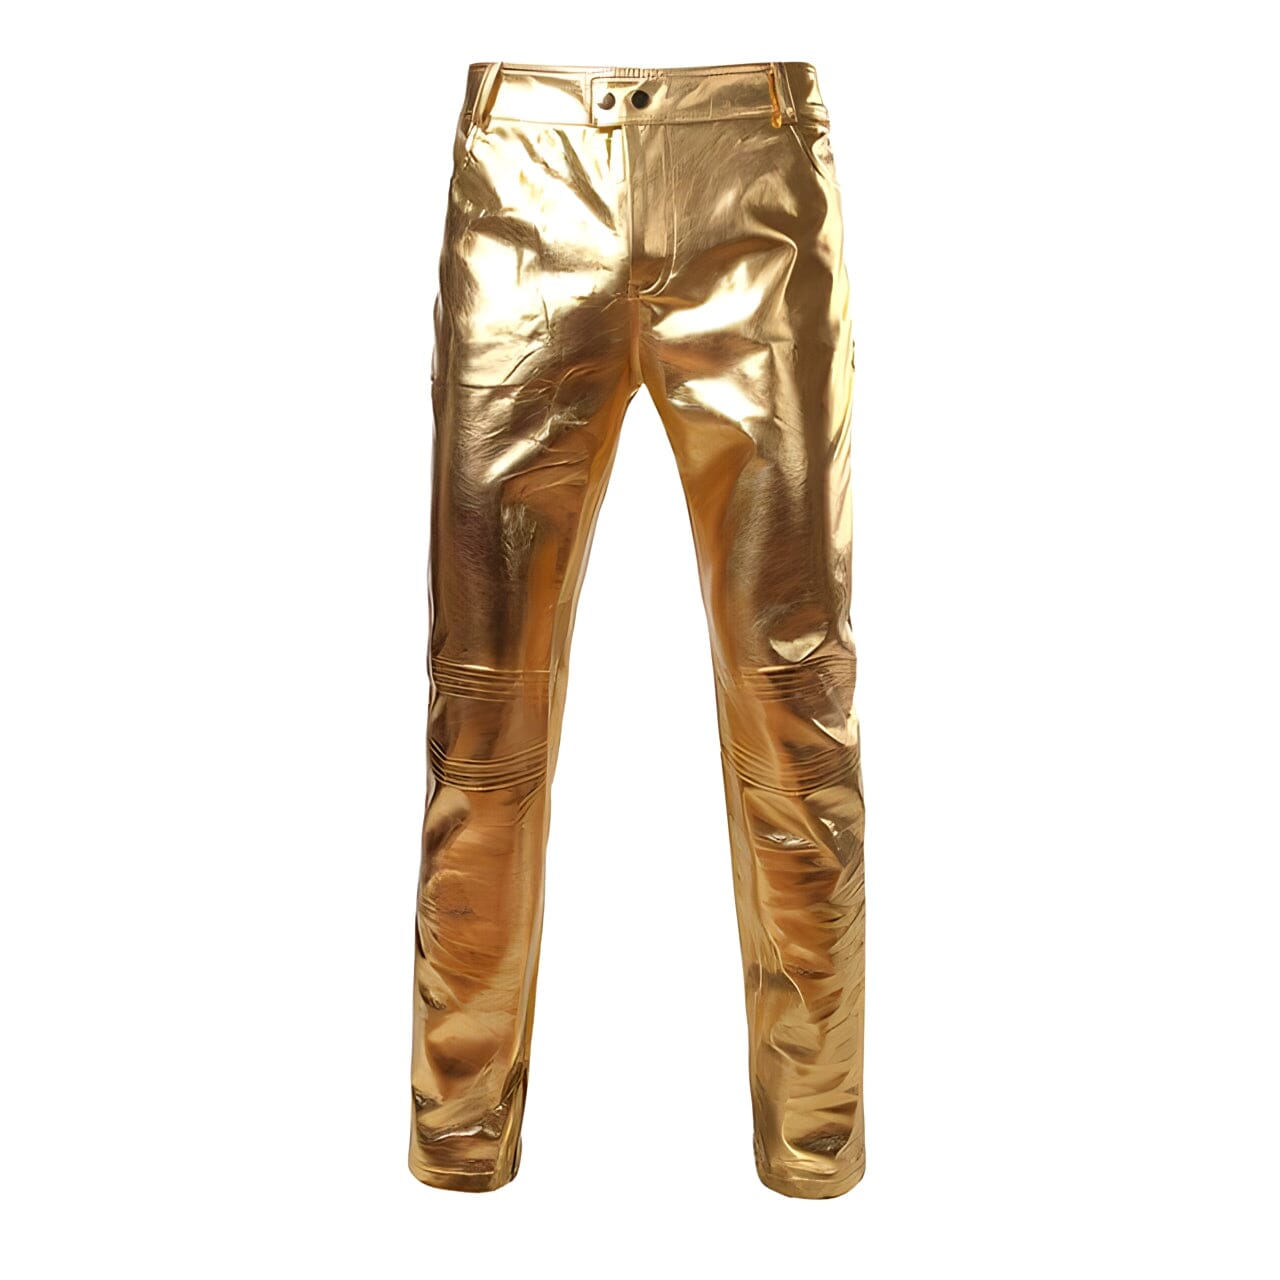 The Mikel High Gloss Biker Pants - Multiple Colors moderatespace Official Store Gold XXS 